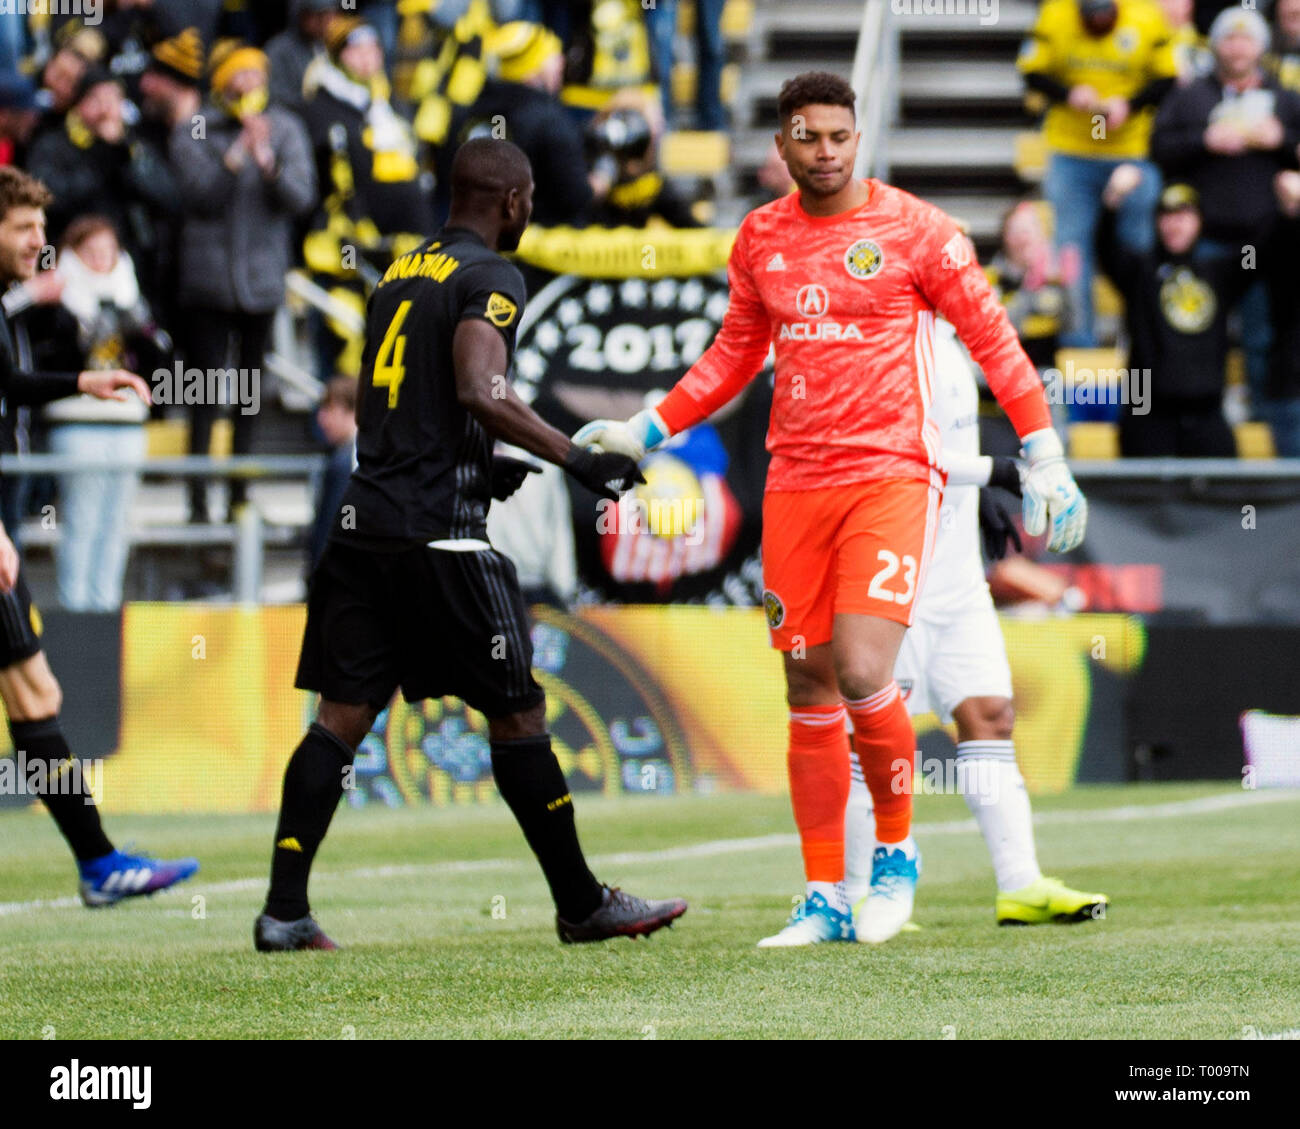 Columbus, Ohio, USA. March 16, 2019: Columbus Crew SC goalkeeper Zack Steffen (23) and Columbus Crew SC defender Jonathan Mensah (4) in between whistles against FC Dallas in their game in Columbus, Ohio, USA. Brent Clark/Alamy Live News Stock Photo